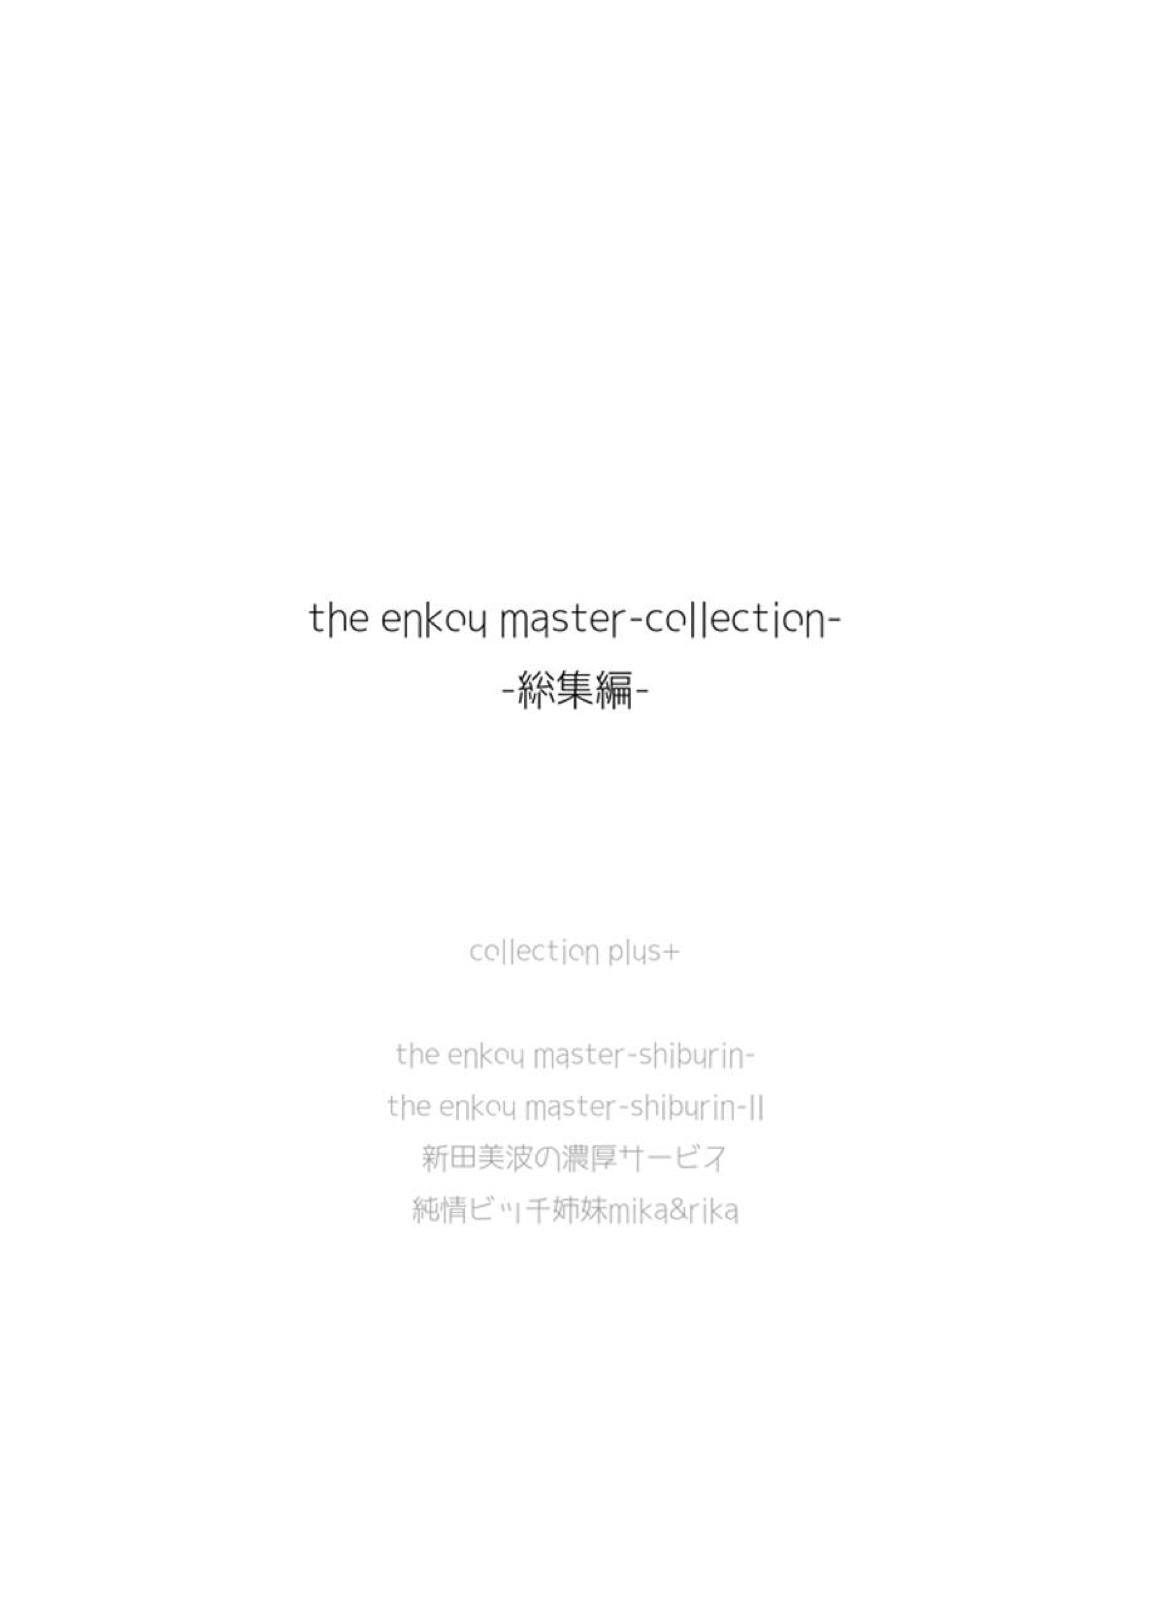 The Enkou m@ster -collection- 総集編 2ページ